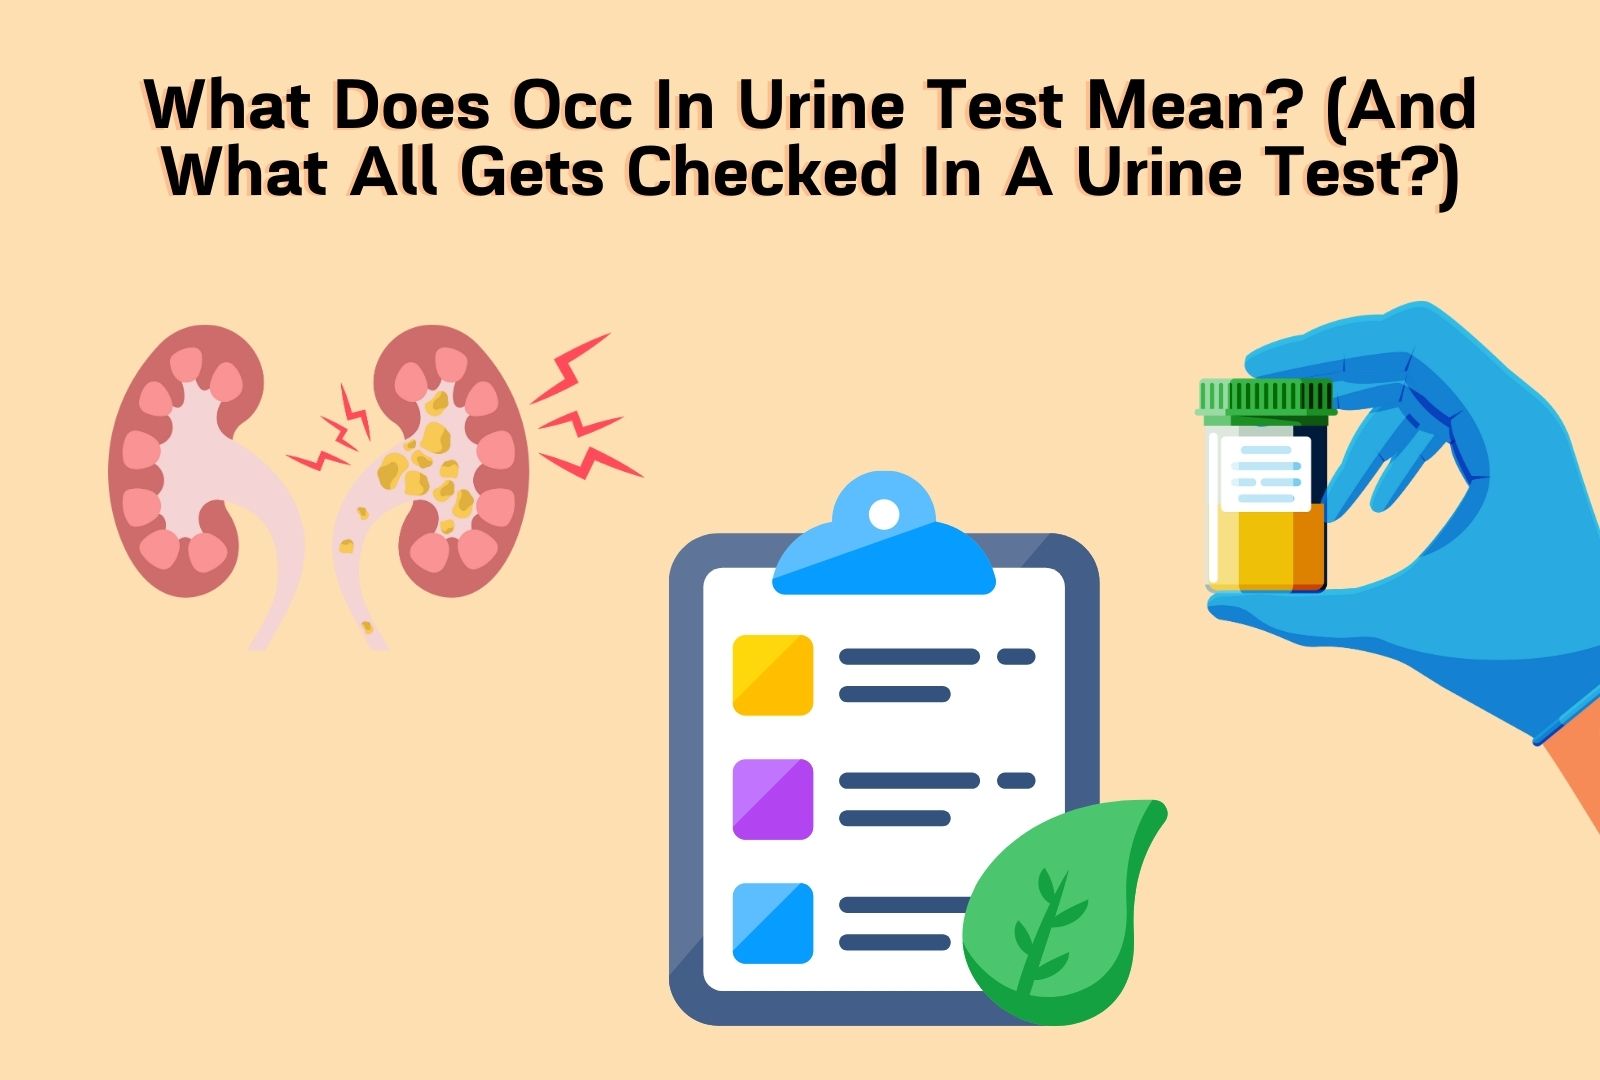 What Does Occ In Urine Test Mean? (And What All Gets Checked In A Urine